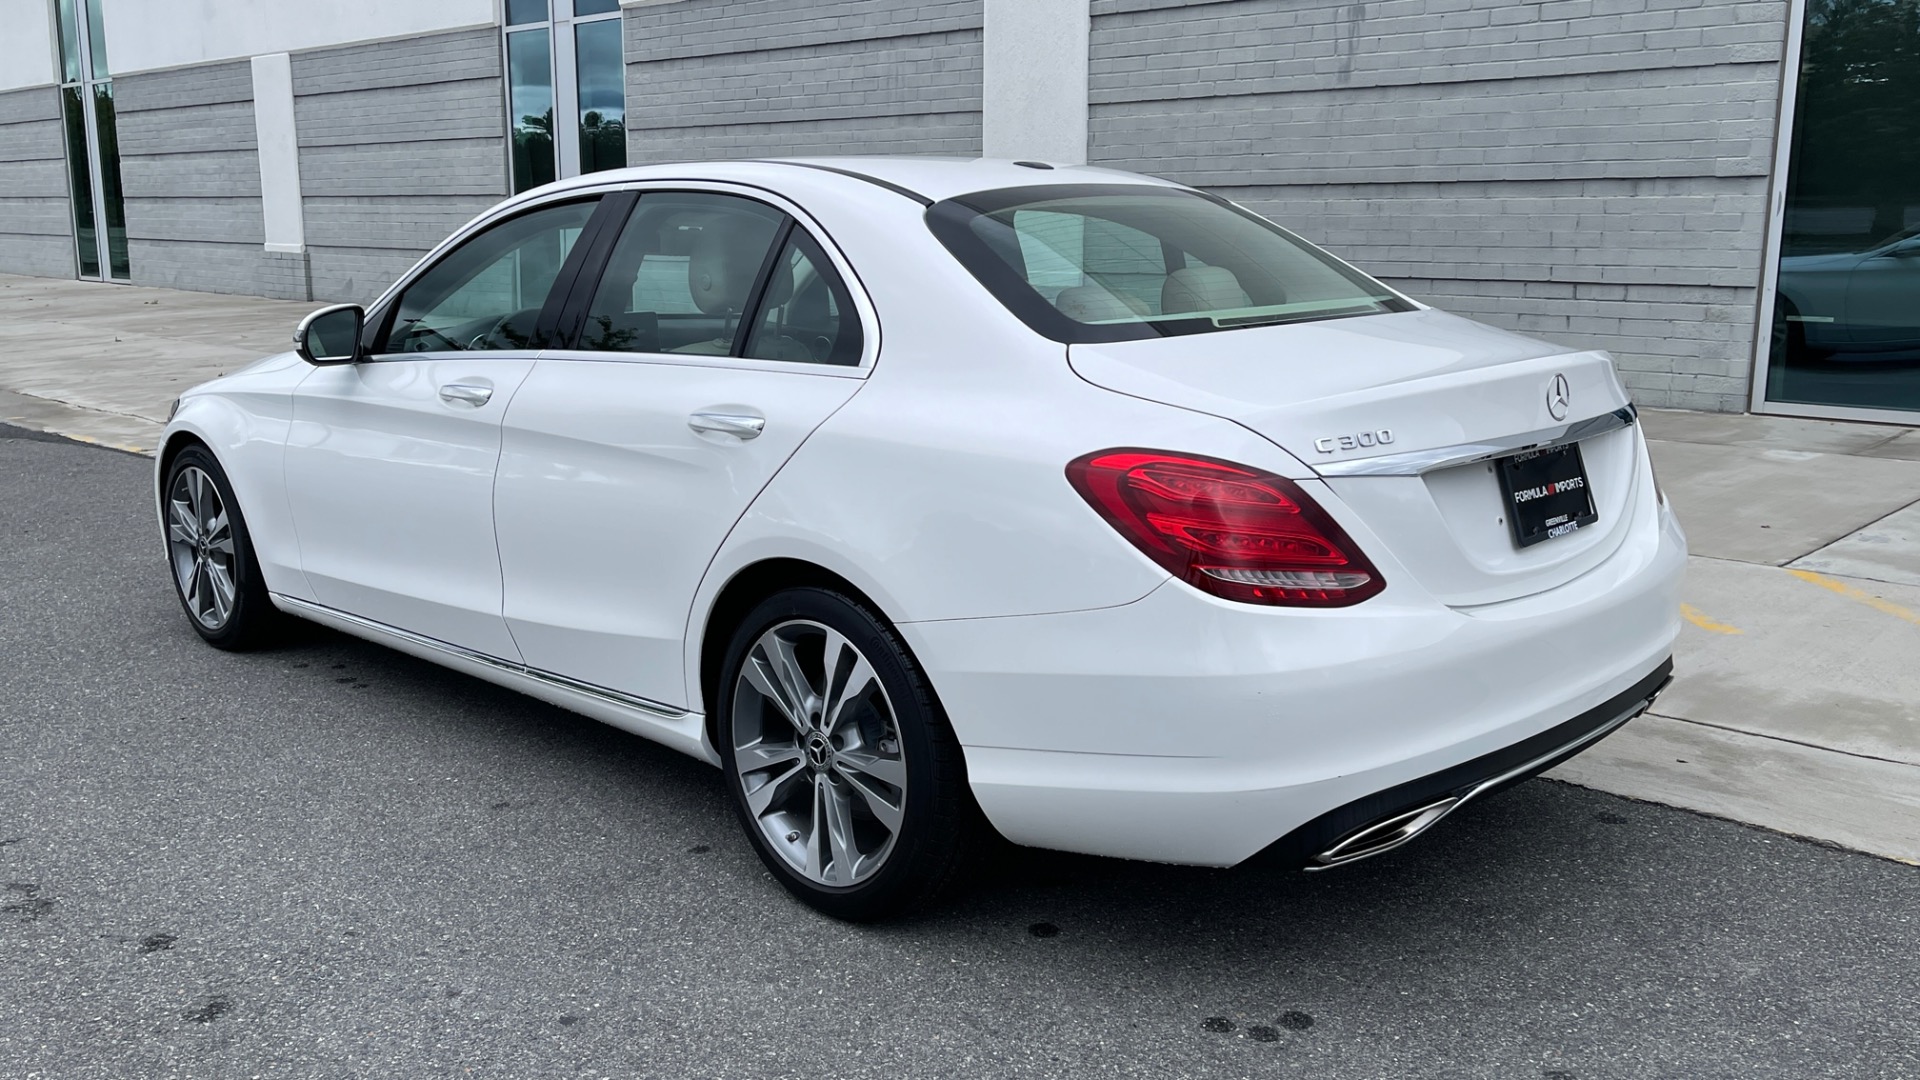 Used 2018 Mercedes-Benz C-Class C 300 / PREMIUM PACKAGE / 18IN WHEELS / HEATED FRONT SEATS / LED HEADLIGHTS for sale Sold at Formula Imports in Charlotte NC 28227 3